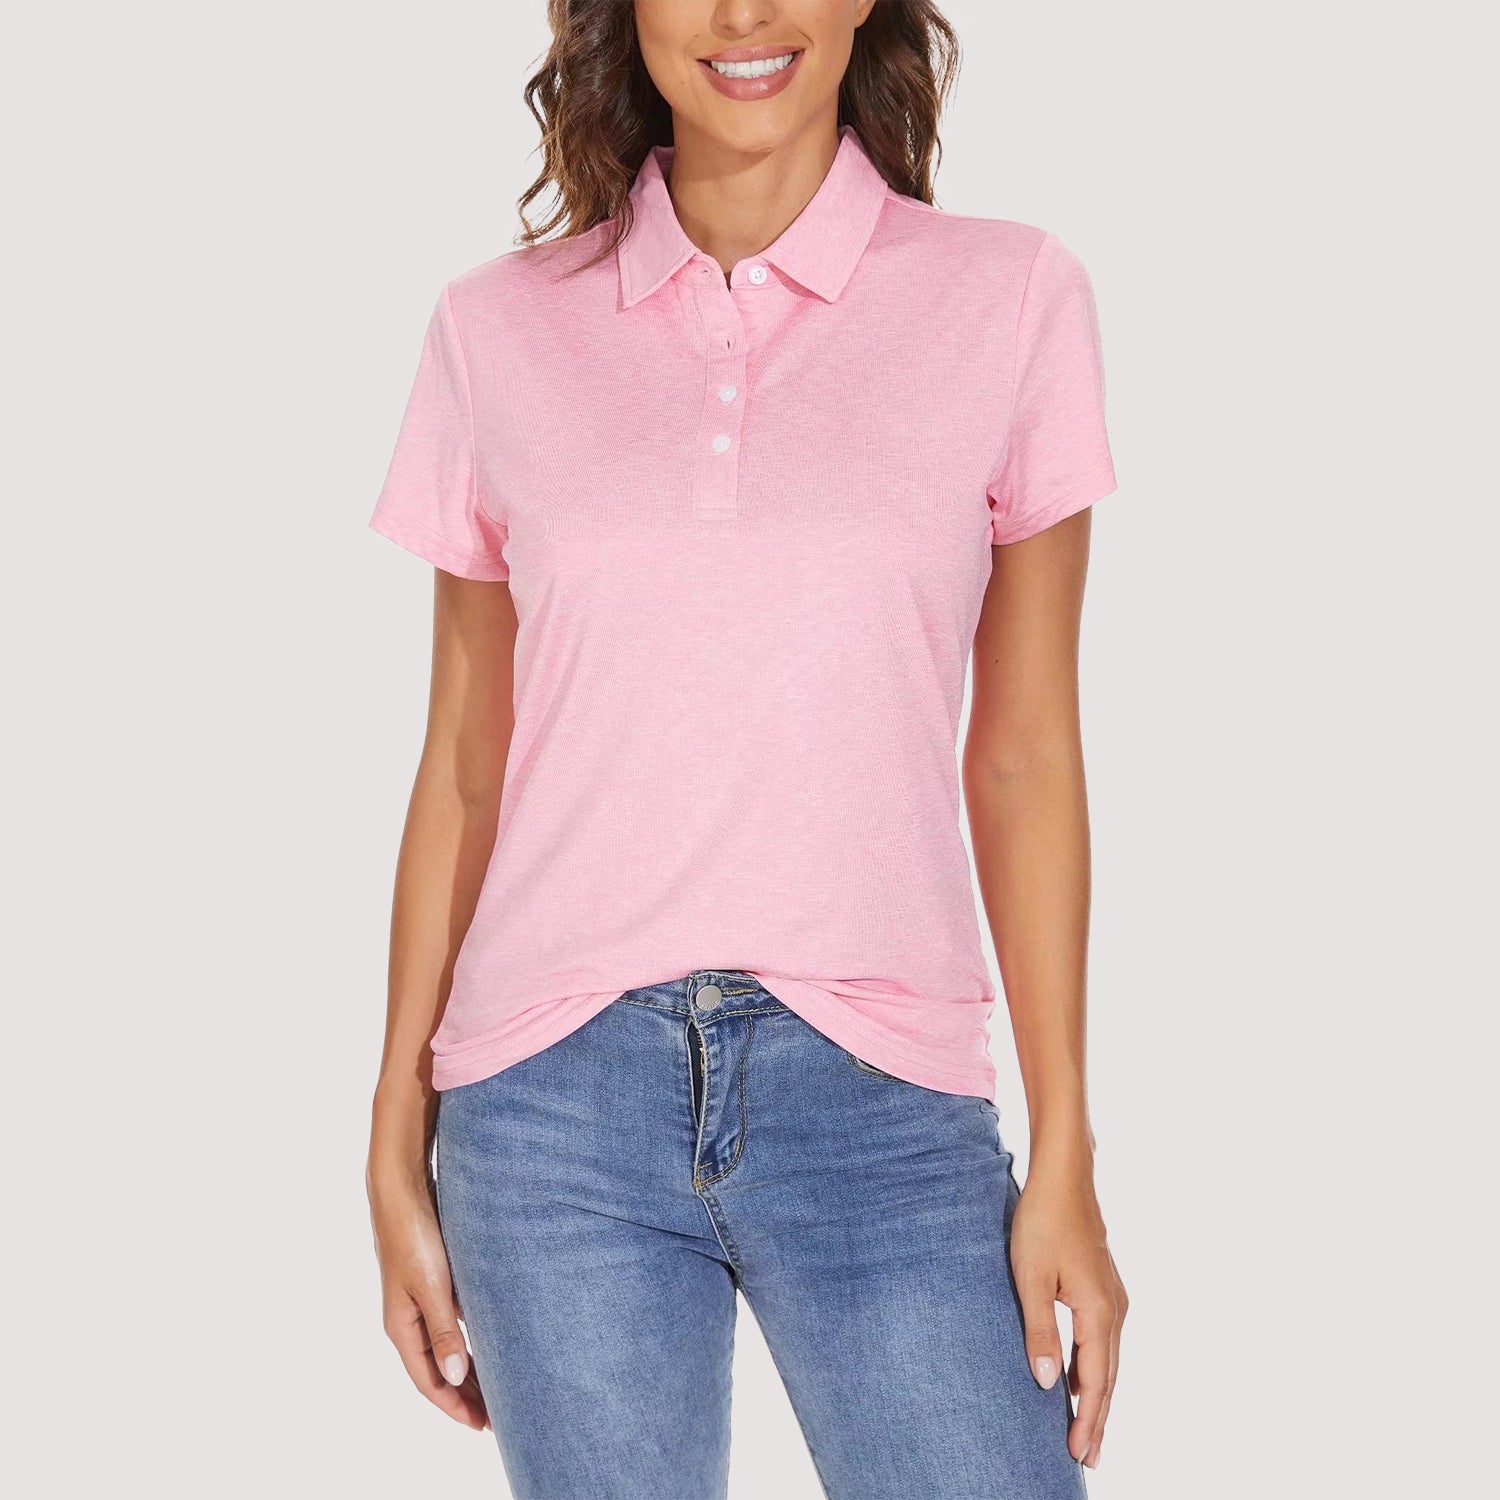 Women's Polo T-Shirts 4-Button Moisture Wicking Athletic Tee Shirts